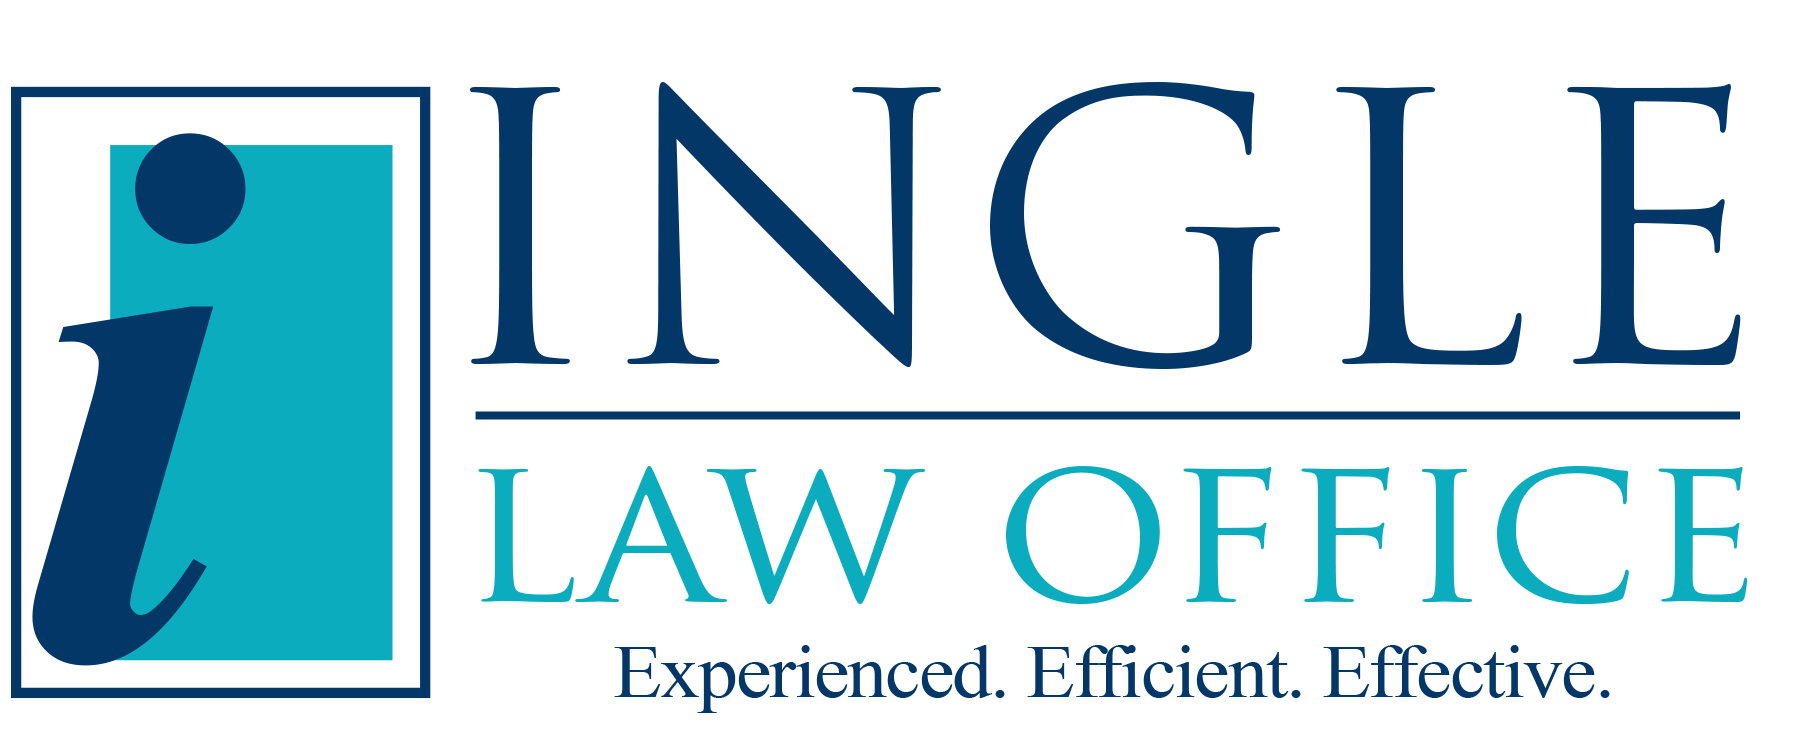 Ingle Law Offices